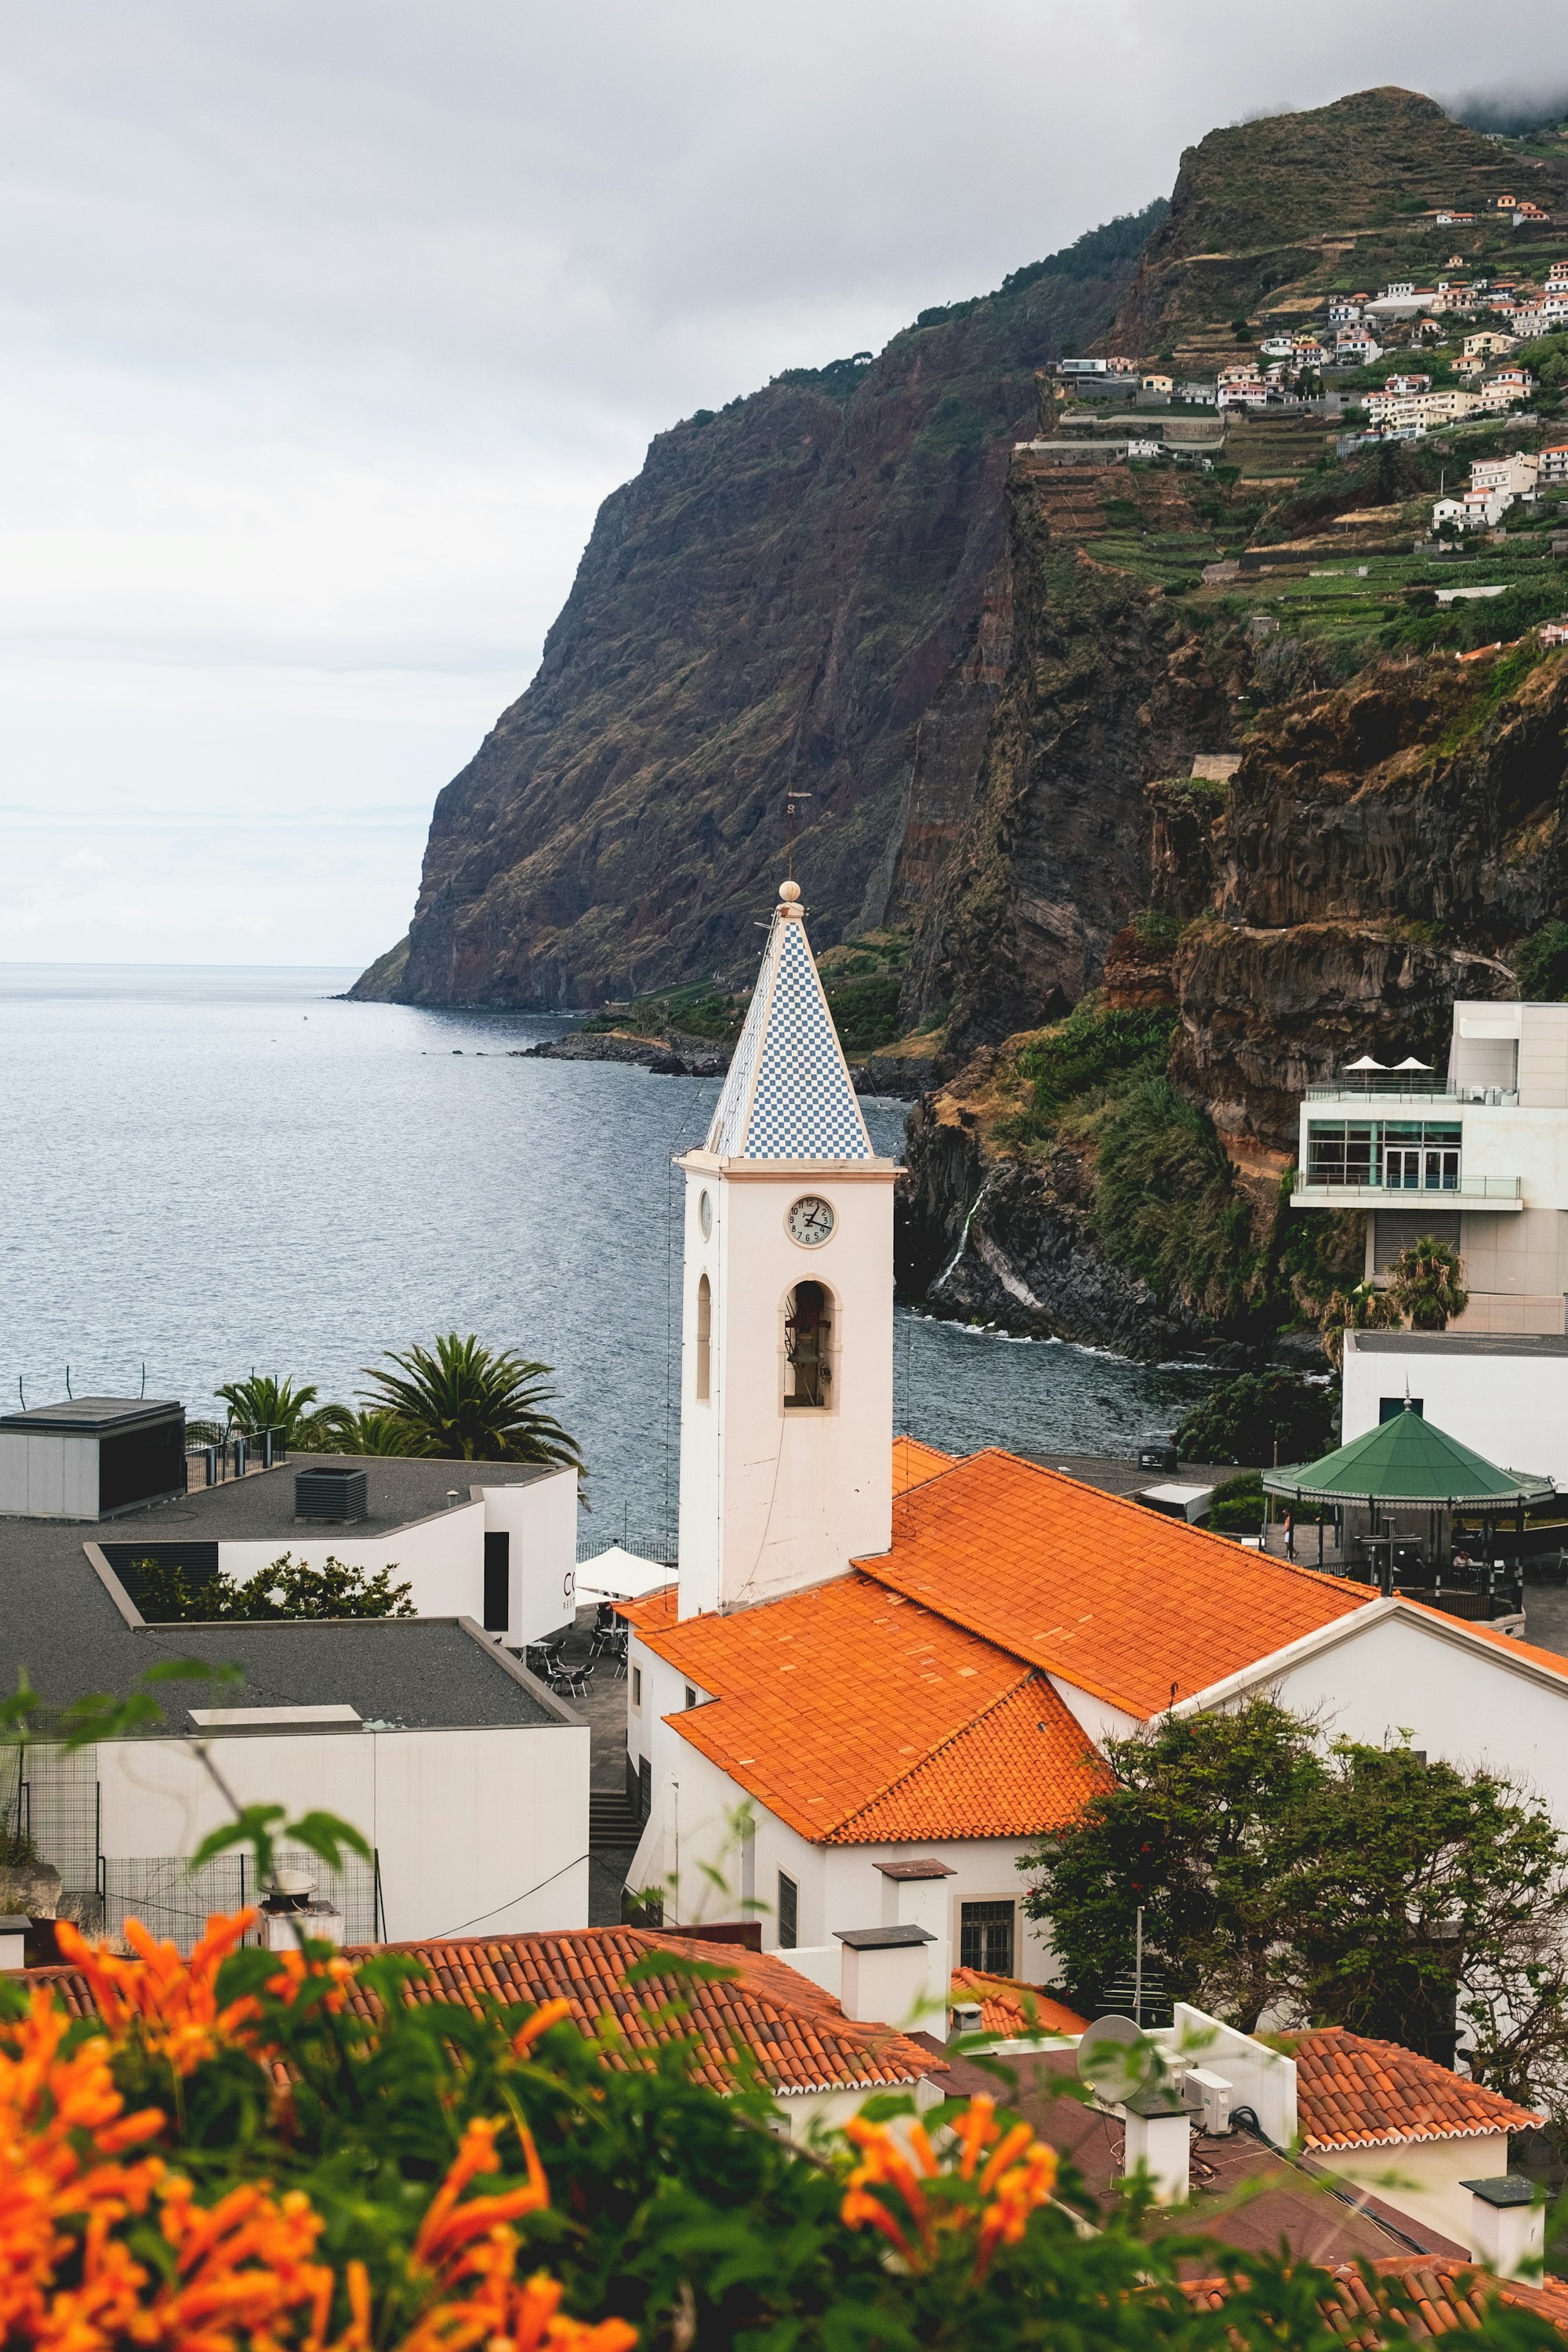 Town of Ponta do Sol in Madeira Island 